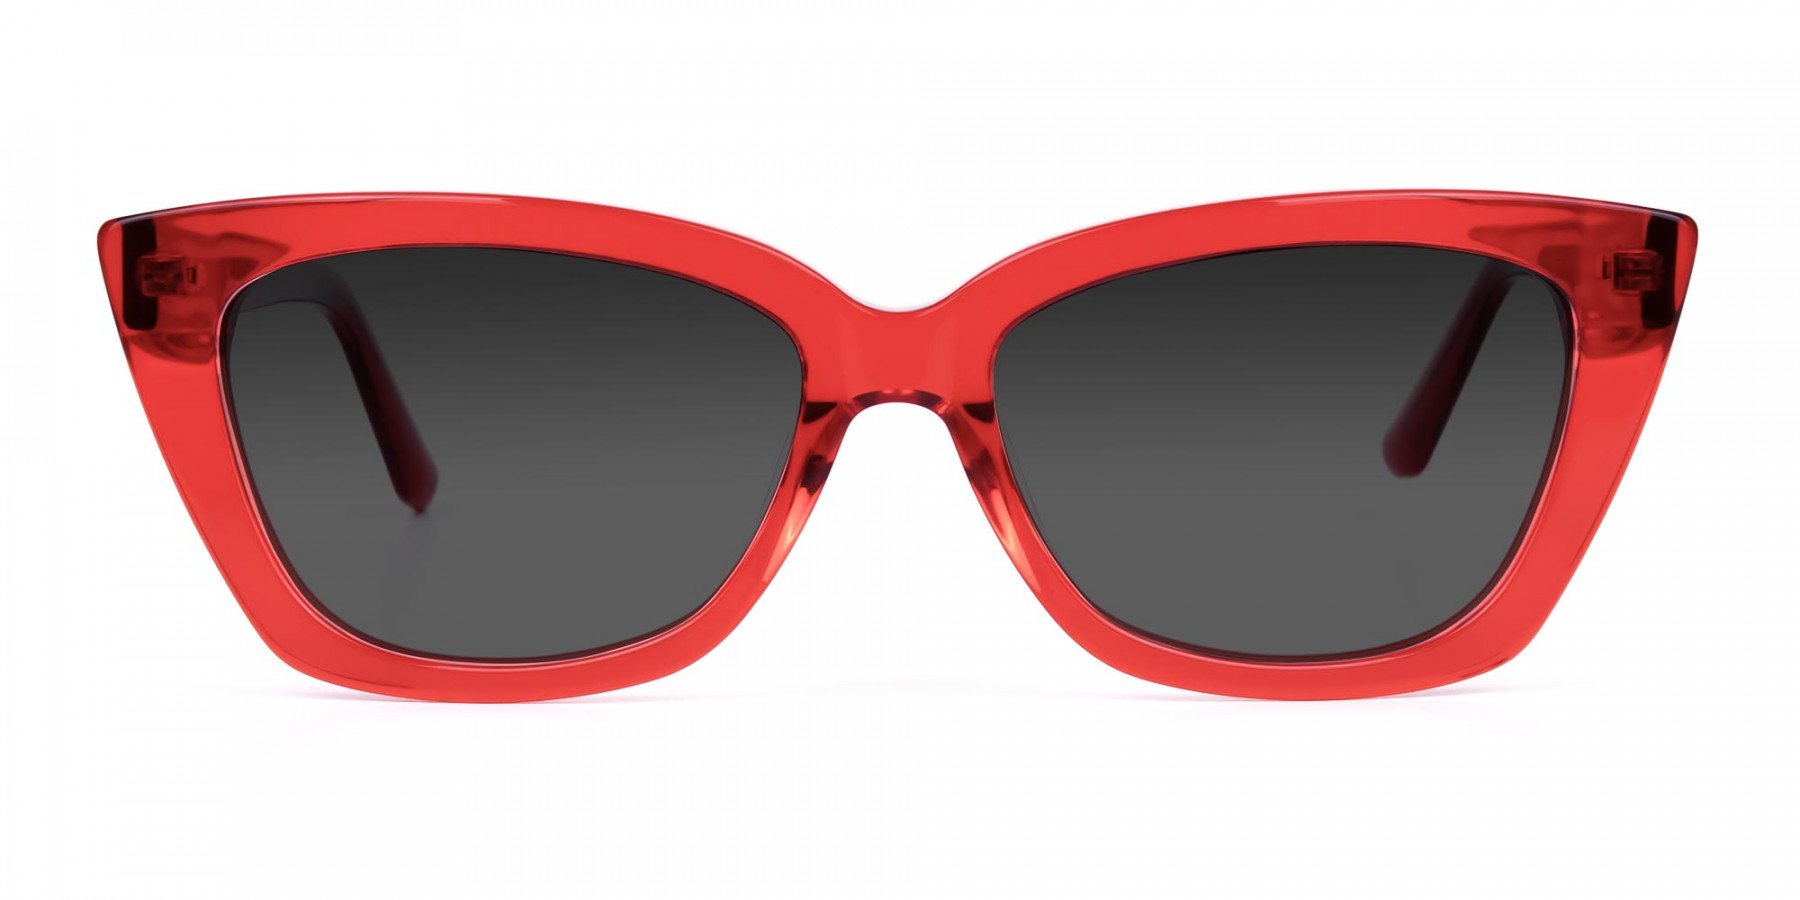 Red-Big-Cat-Eye-Sunglasses-with-Grey-Tint-1